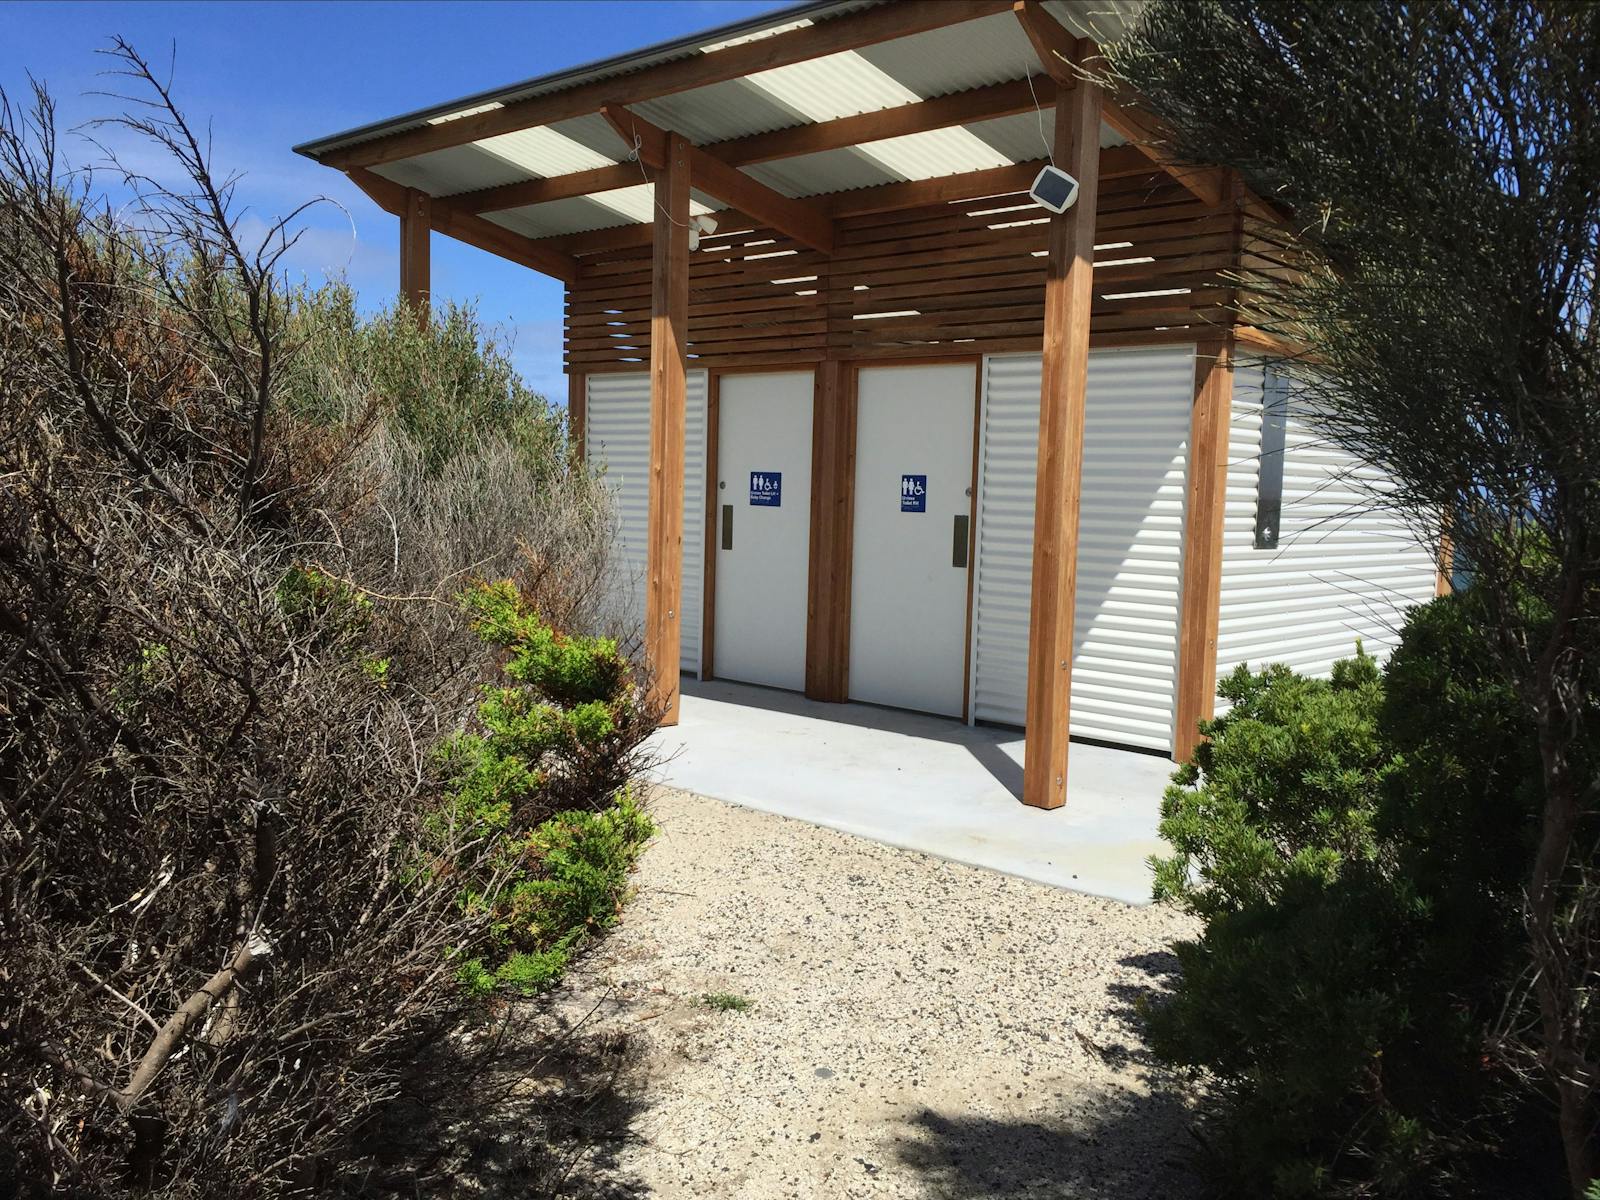 Facilities close by to the free gas barbecue at Whitemark Foreshore Flinders Island Tasmania